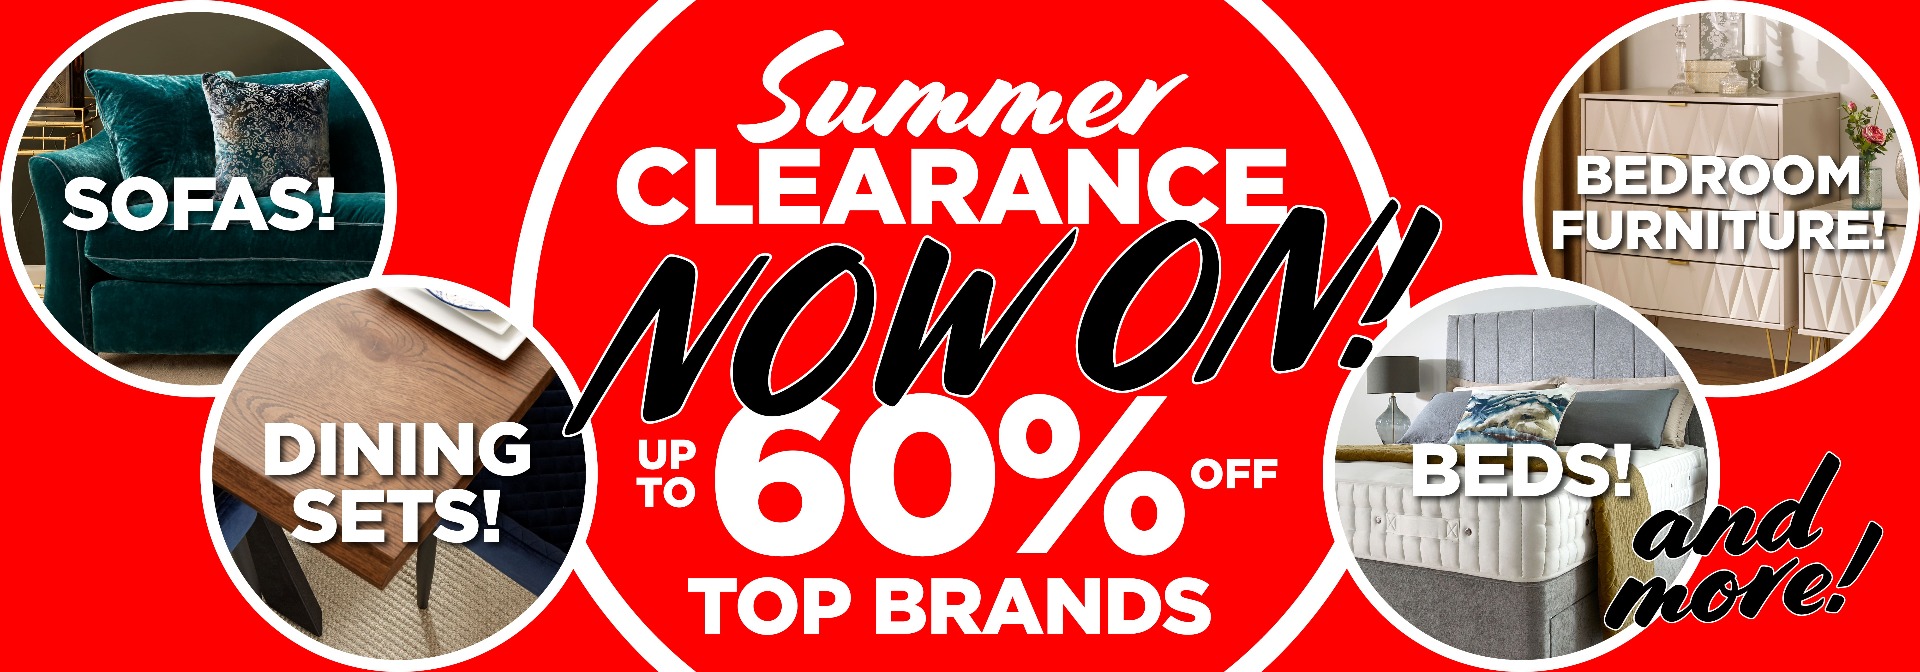 Taskers Summer Clearance Sale Now On